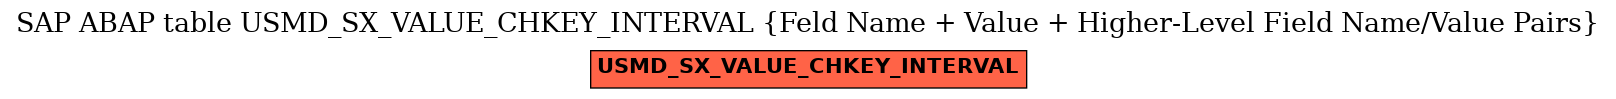 E-R Diagram for table USMD_SX_VALUE_CHKEY_INTERVAL (Feld Name + Value + Higher-Level Field Name/Value Pairs)